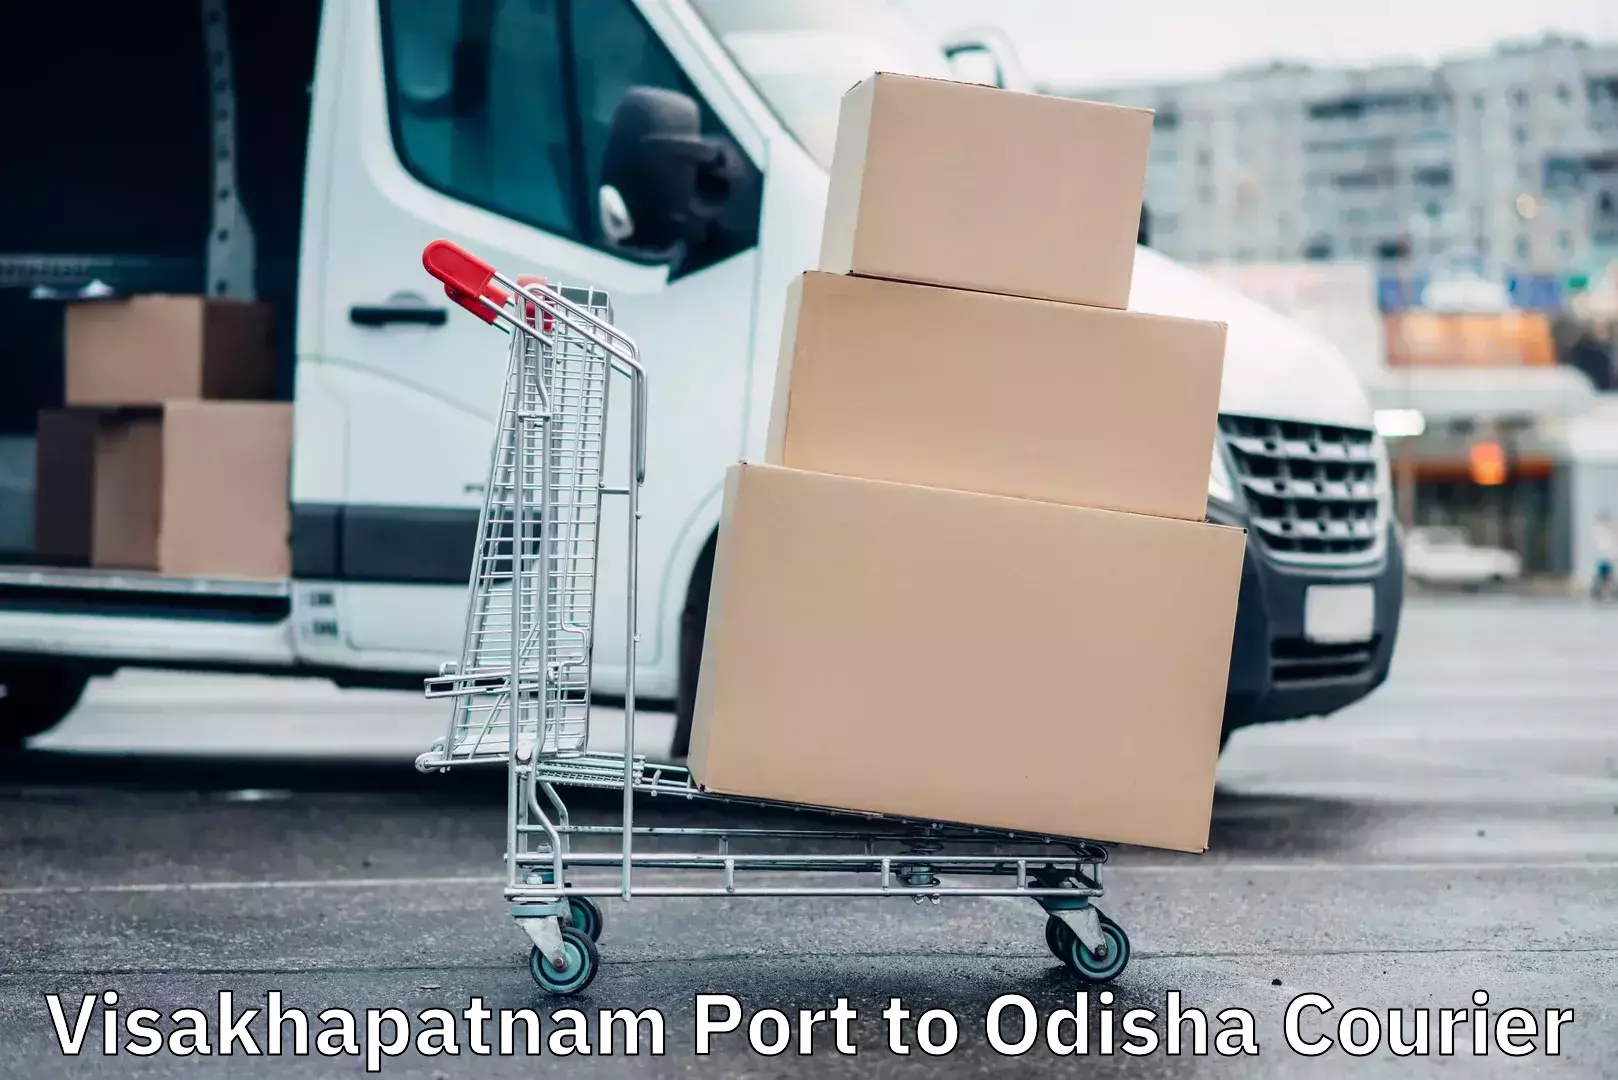 On-call courier service Visakhapatnam Port to Odisha